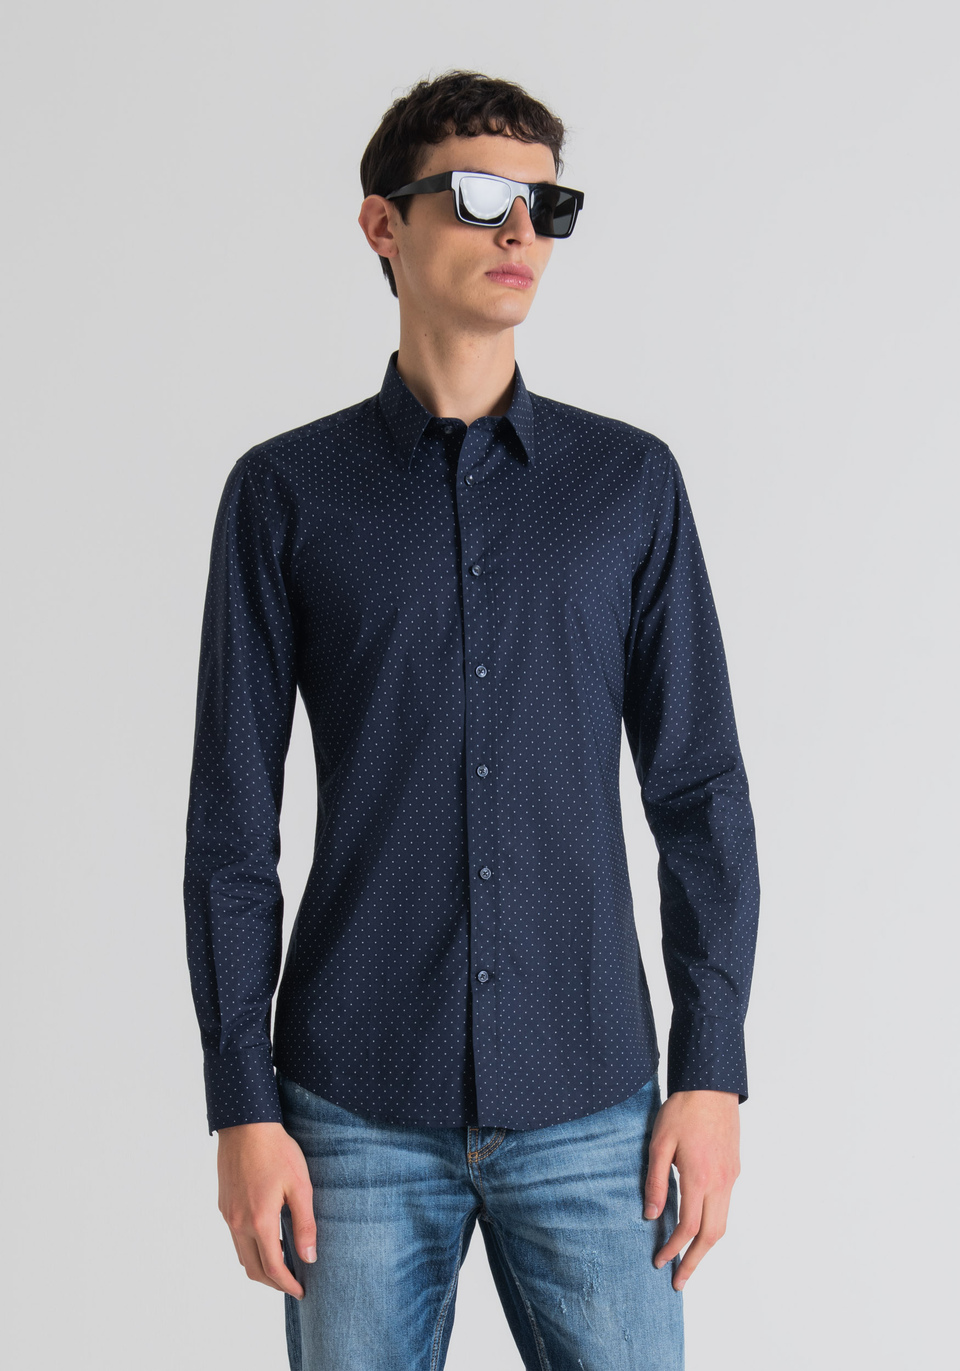 SLIM-FIT SHIRT IN 100% COTTON WITH MICRO-DOT PRINT - Antony Morato Online Shop